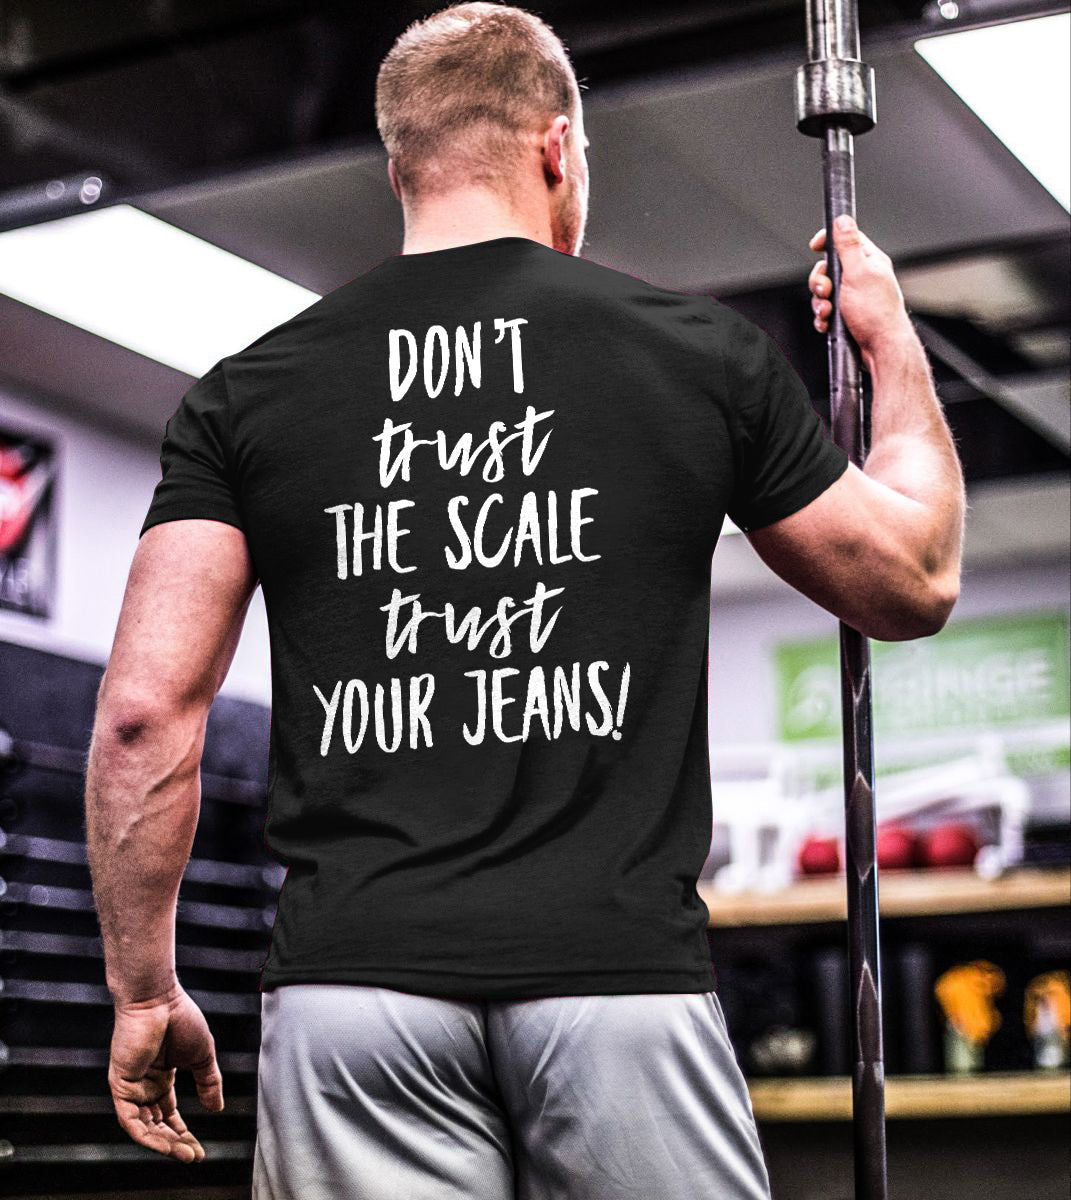 Don't Trust The Scale Trust Your Jeans Printed T-shirt